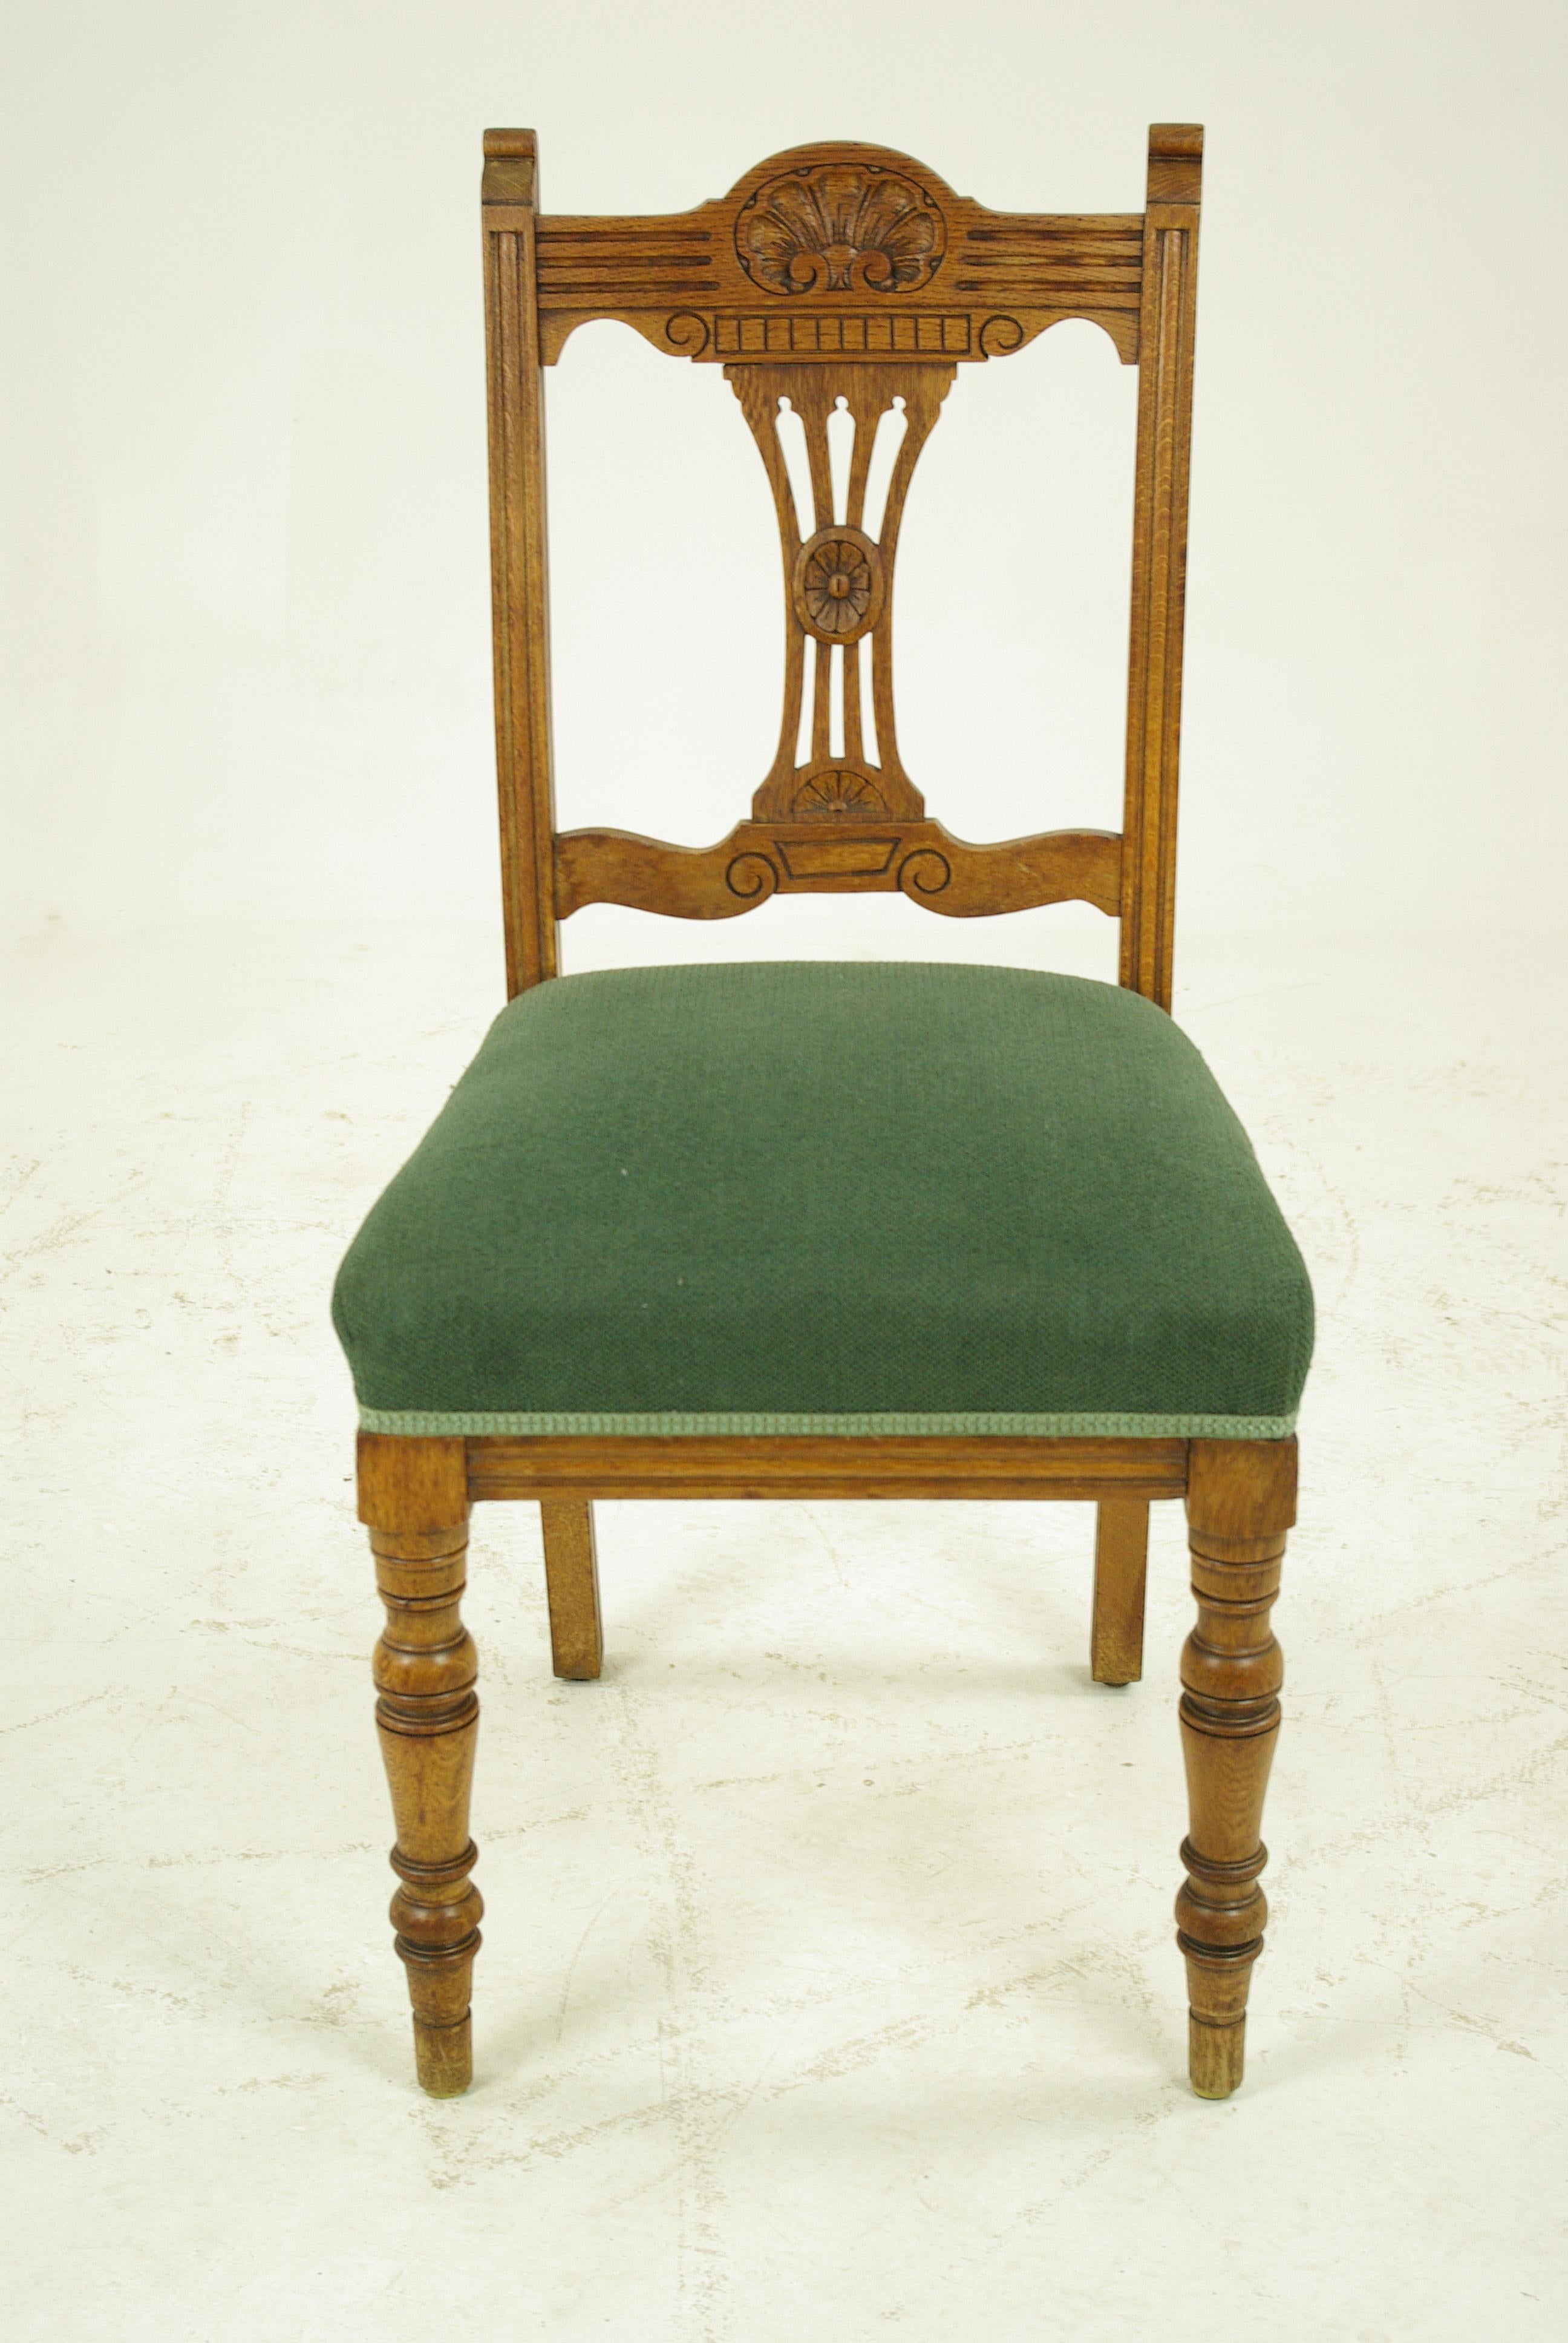 Antique dining chairs, upholstered chairs, 4 dining chairs, Scotland 1900, antique furniture, B1435

Scotland 1900
Solid oak
Lovely carved shaped top rail
Carved center splat with shaped uprights
Upholstered in a green mohair fabric
Sitting